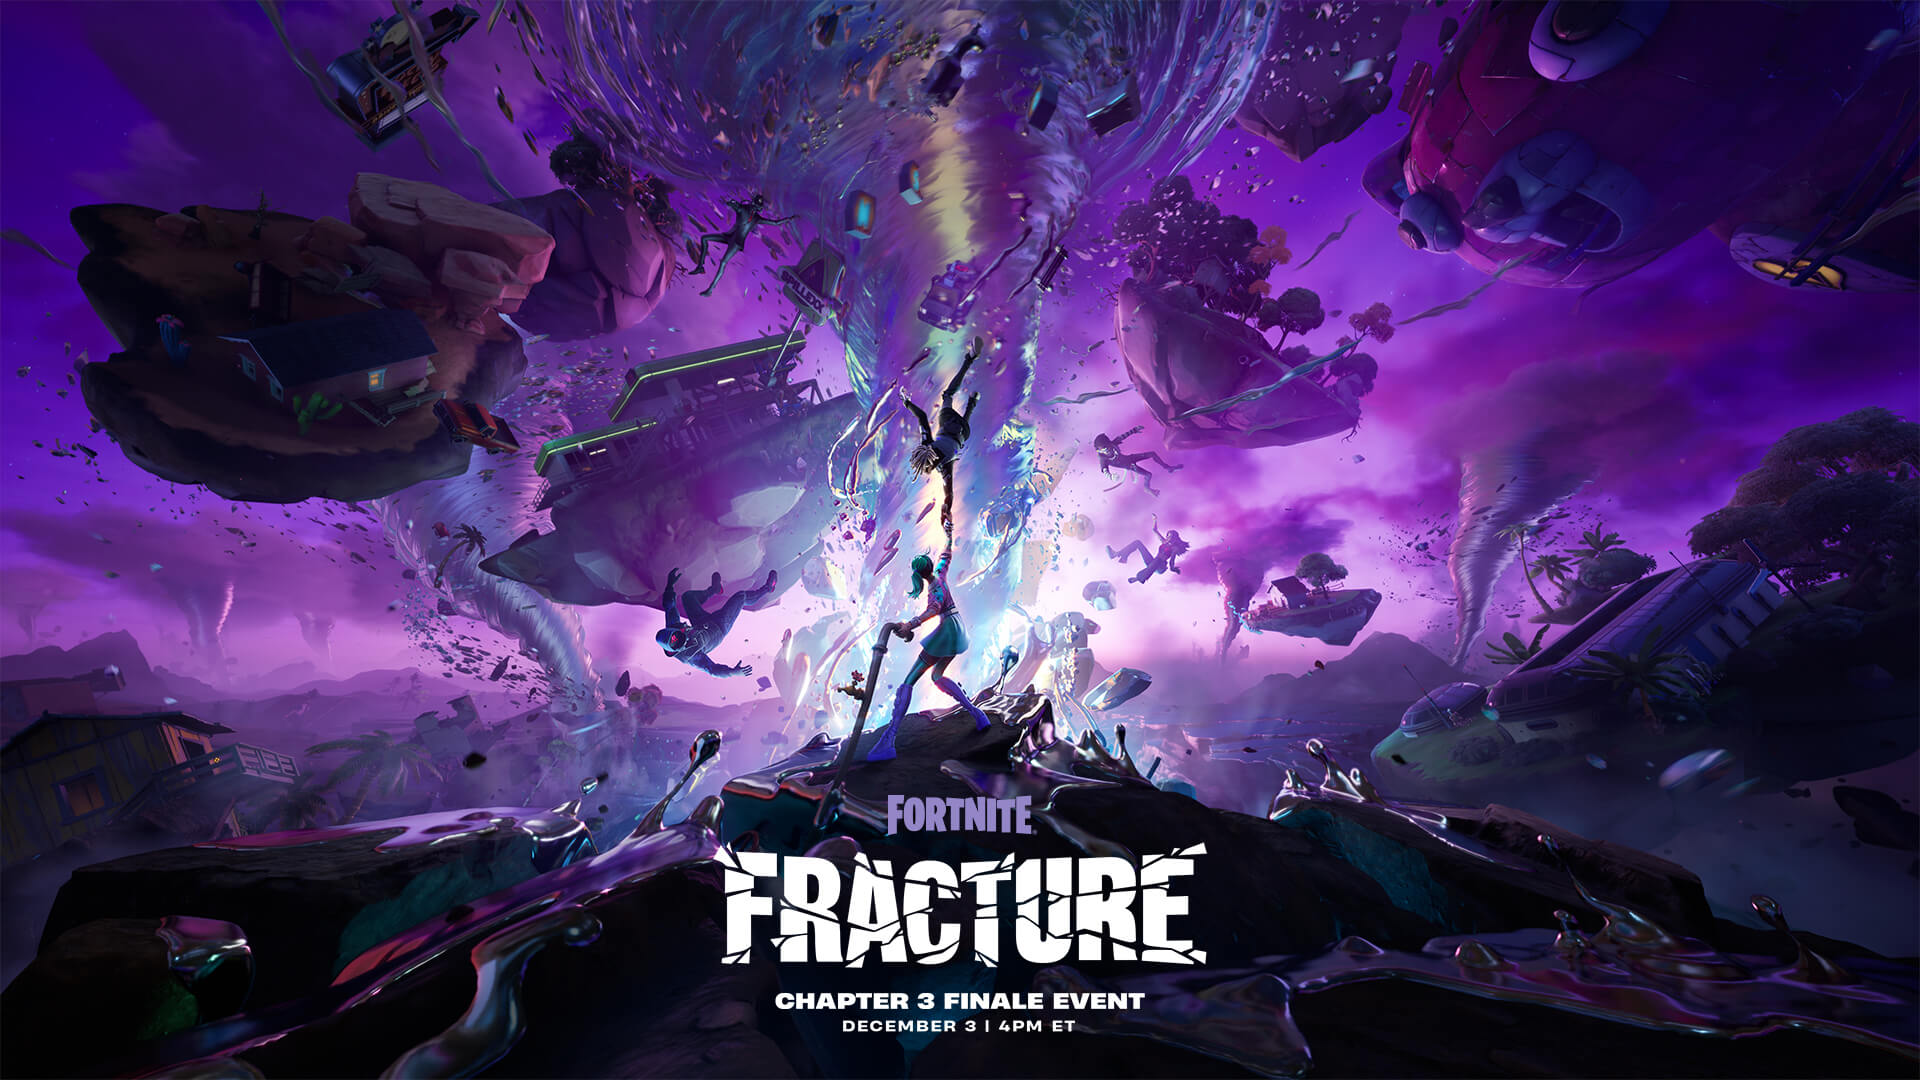 Play the Fortnite “Fracture” Chapter 3 Finale Event on December 3